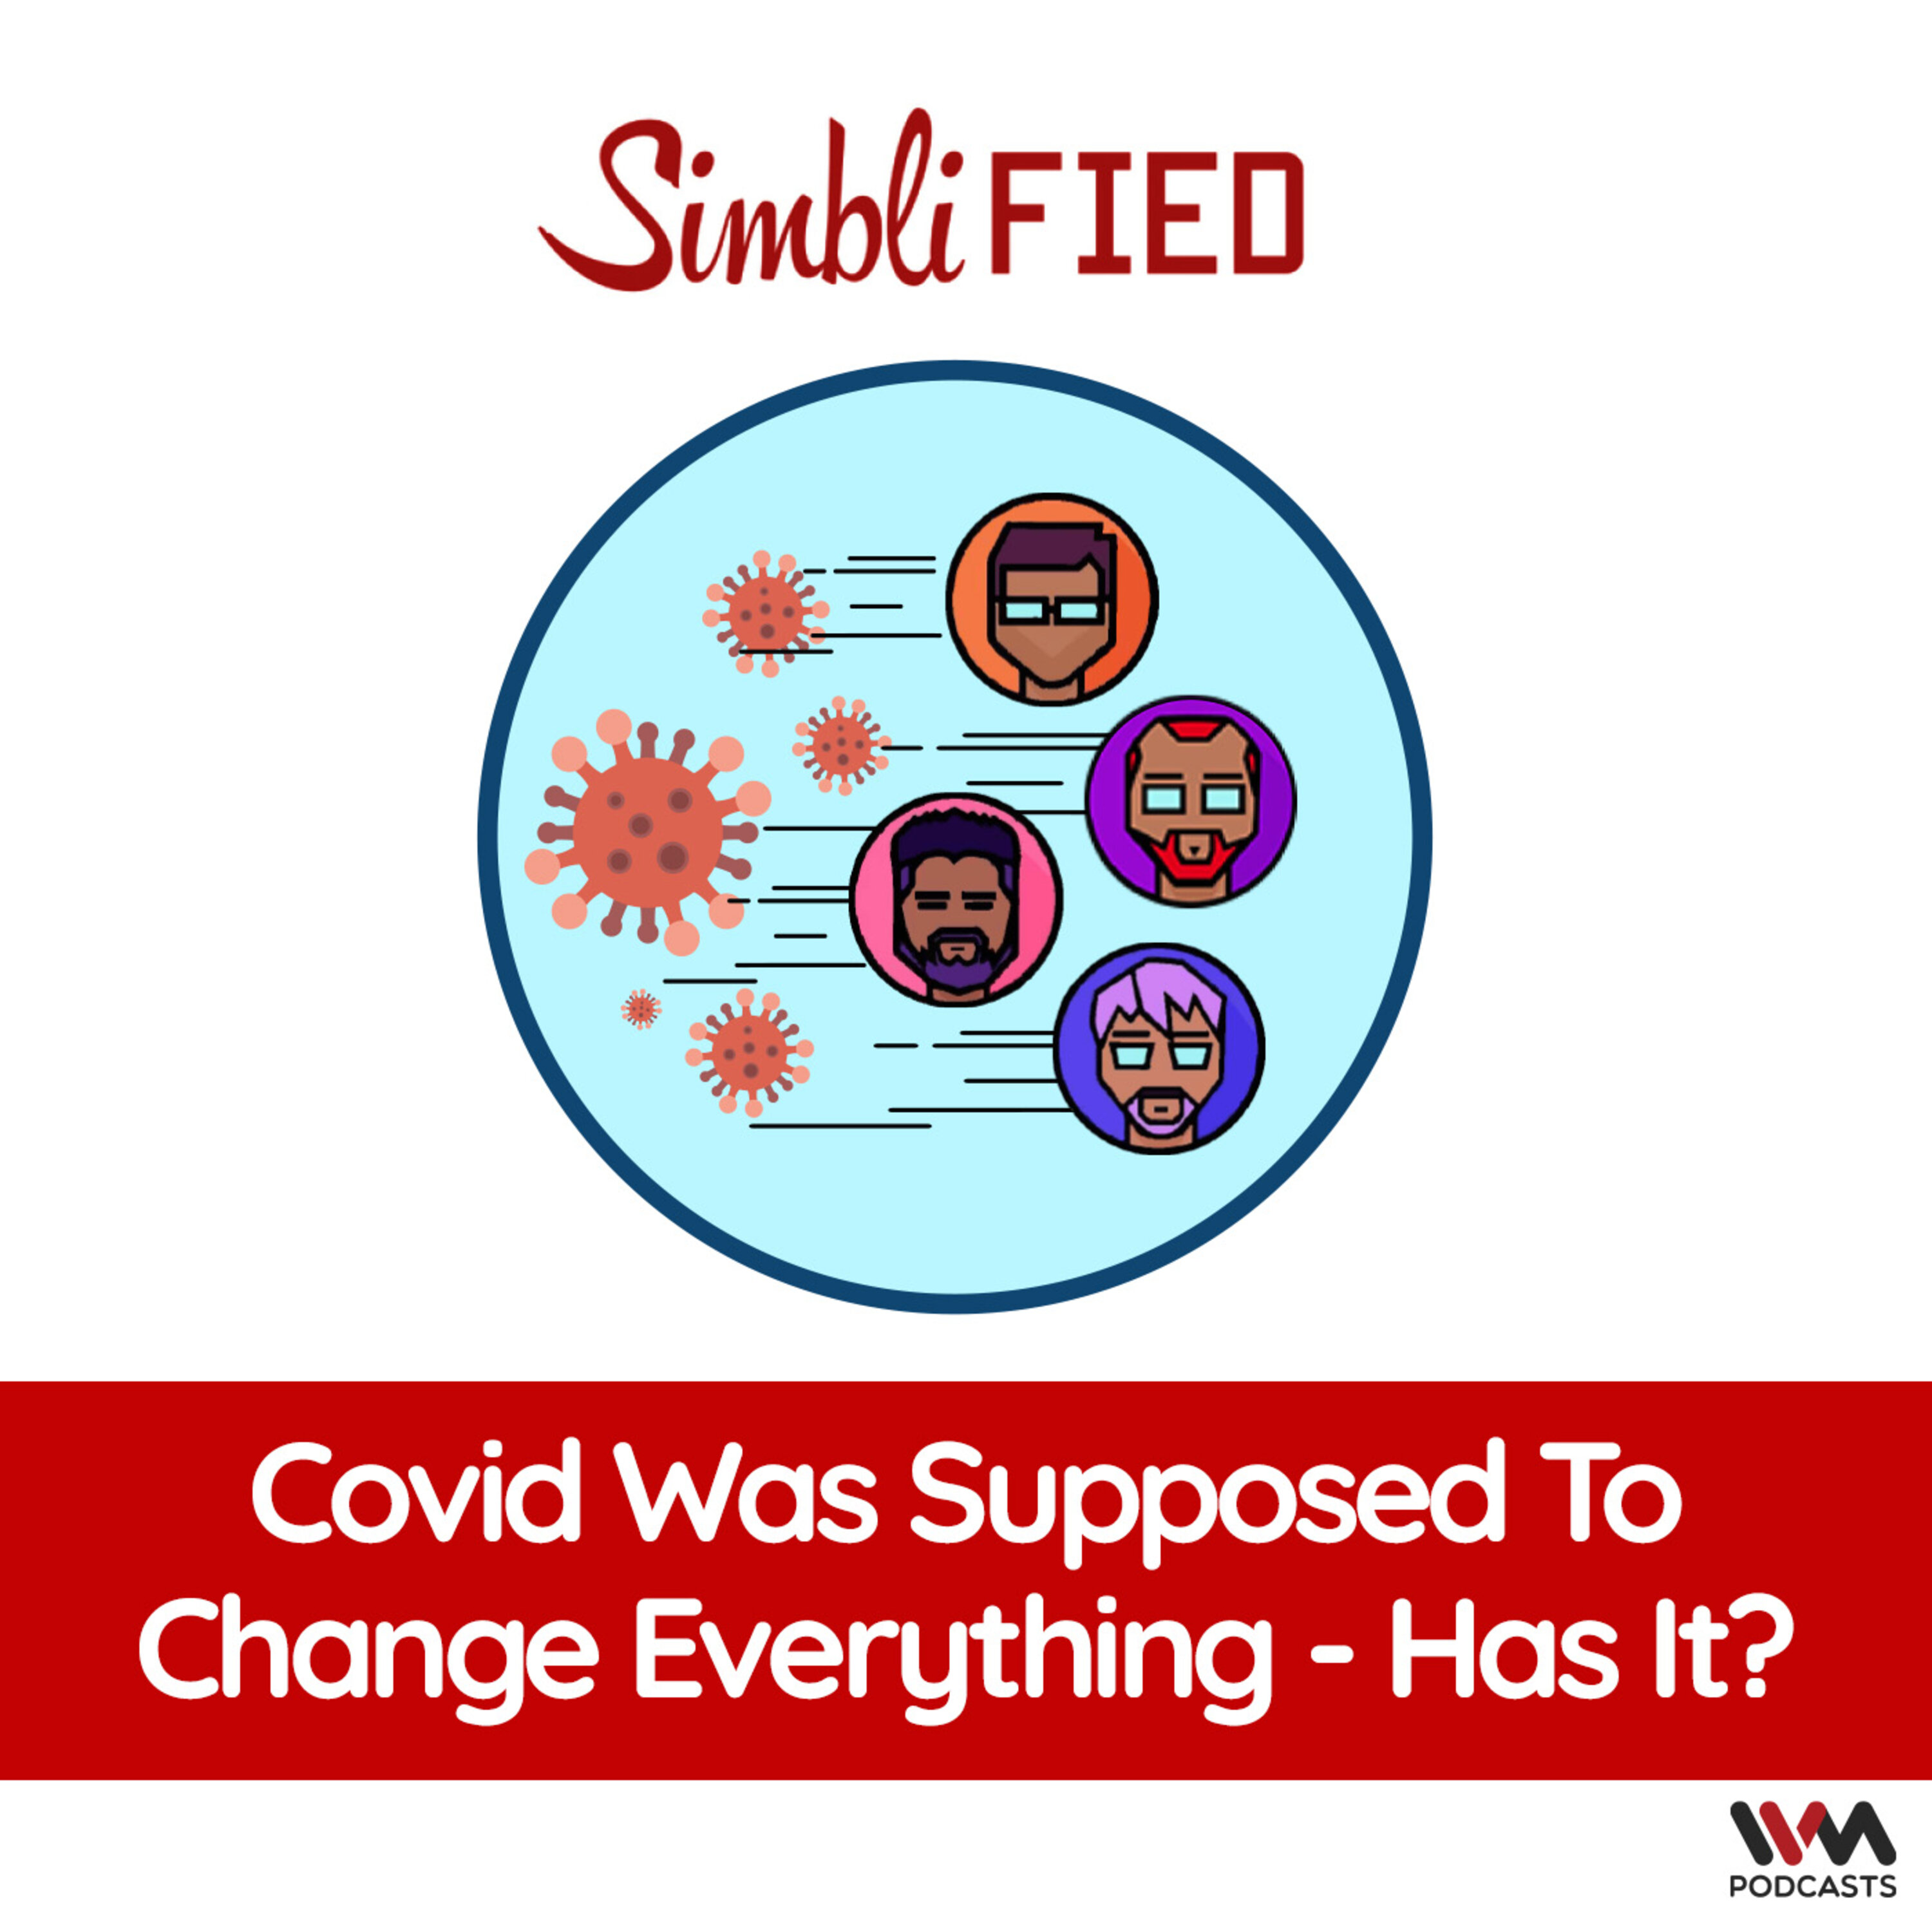 Covid was supposed to change everything - has it?